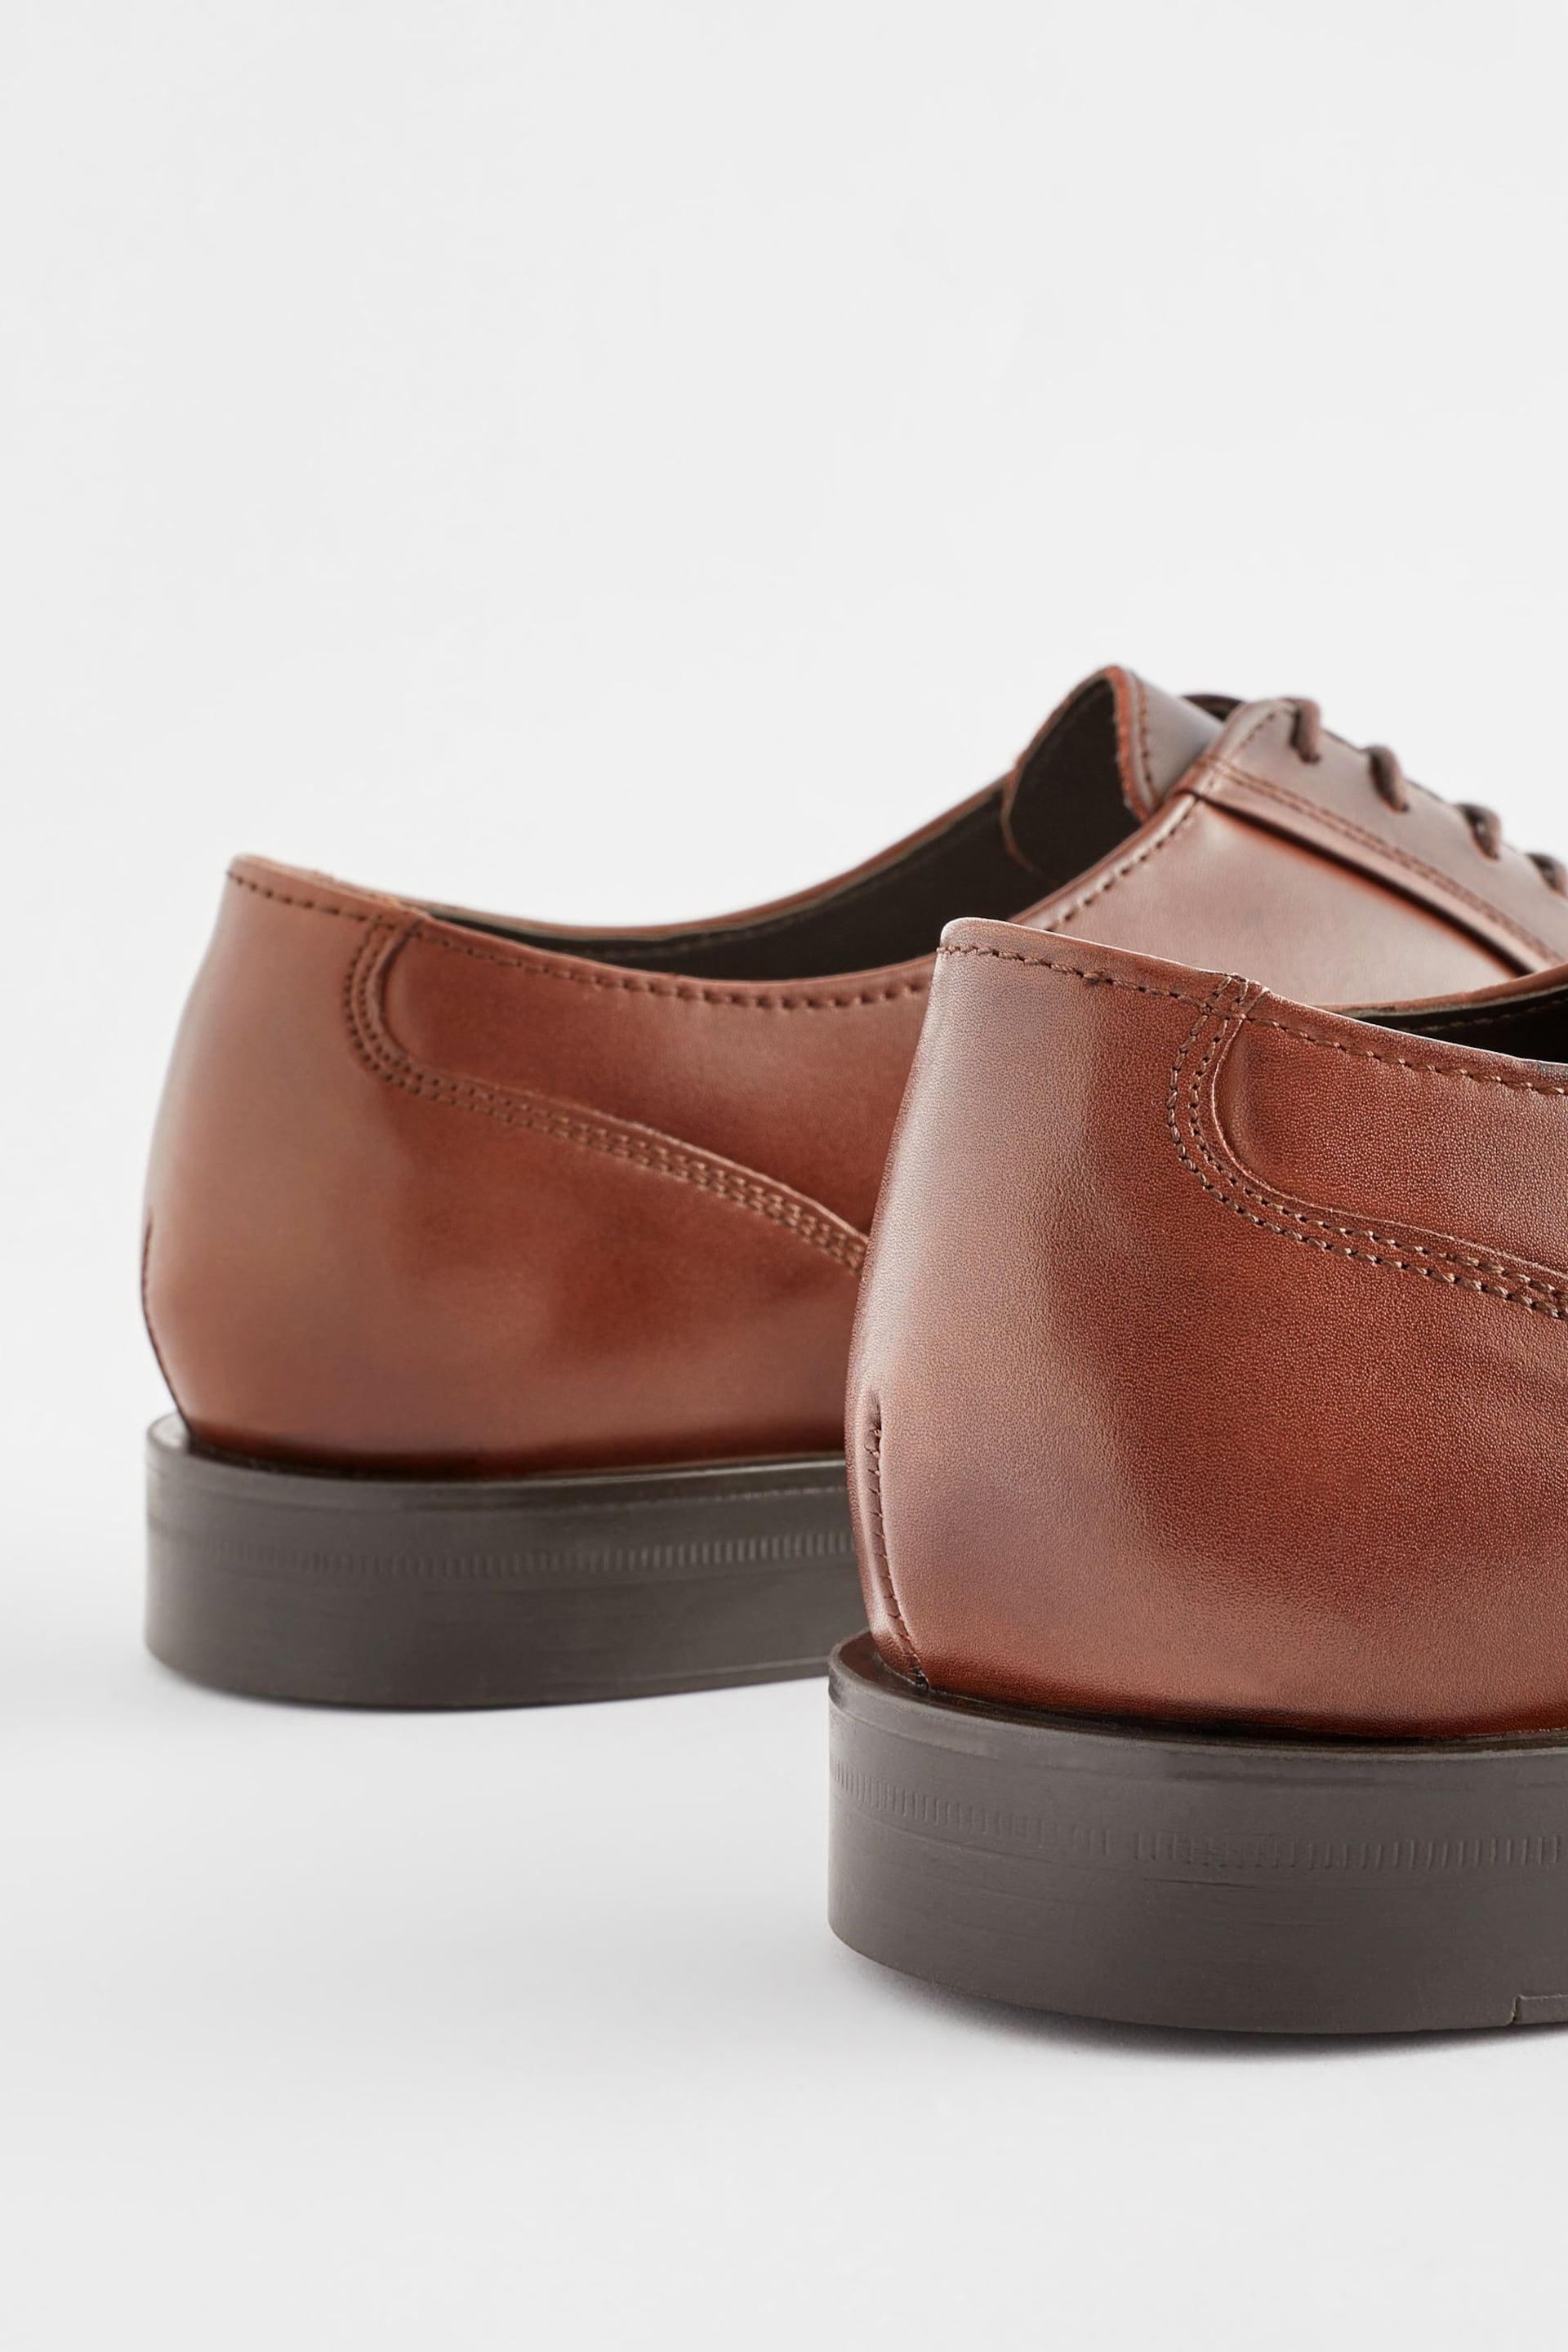 Brown Leather Oxford Toecap Shoes - Image 5 of 6